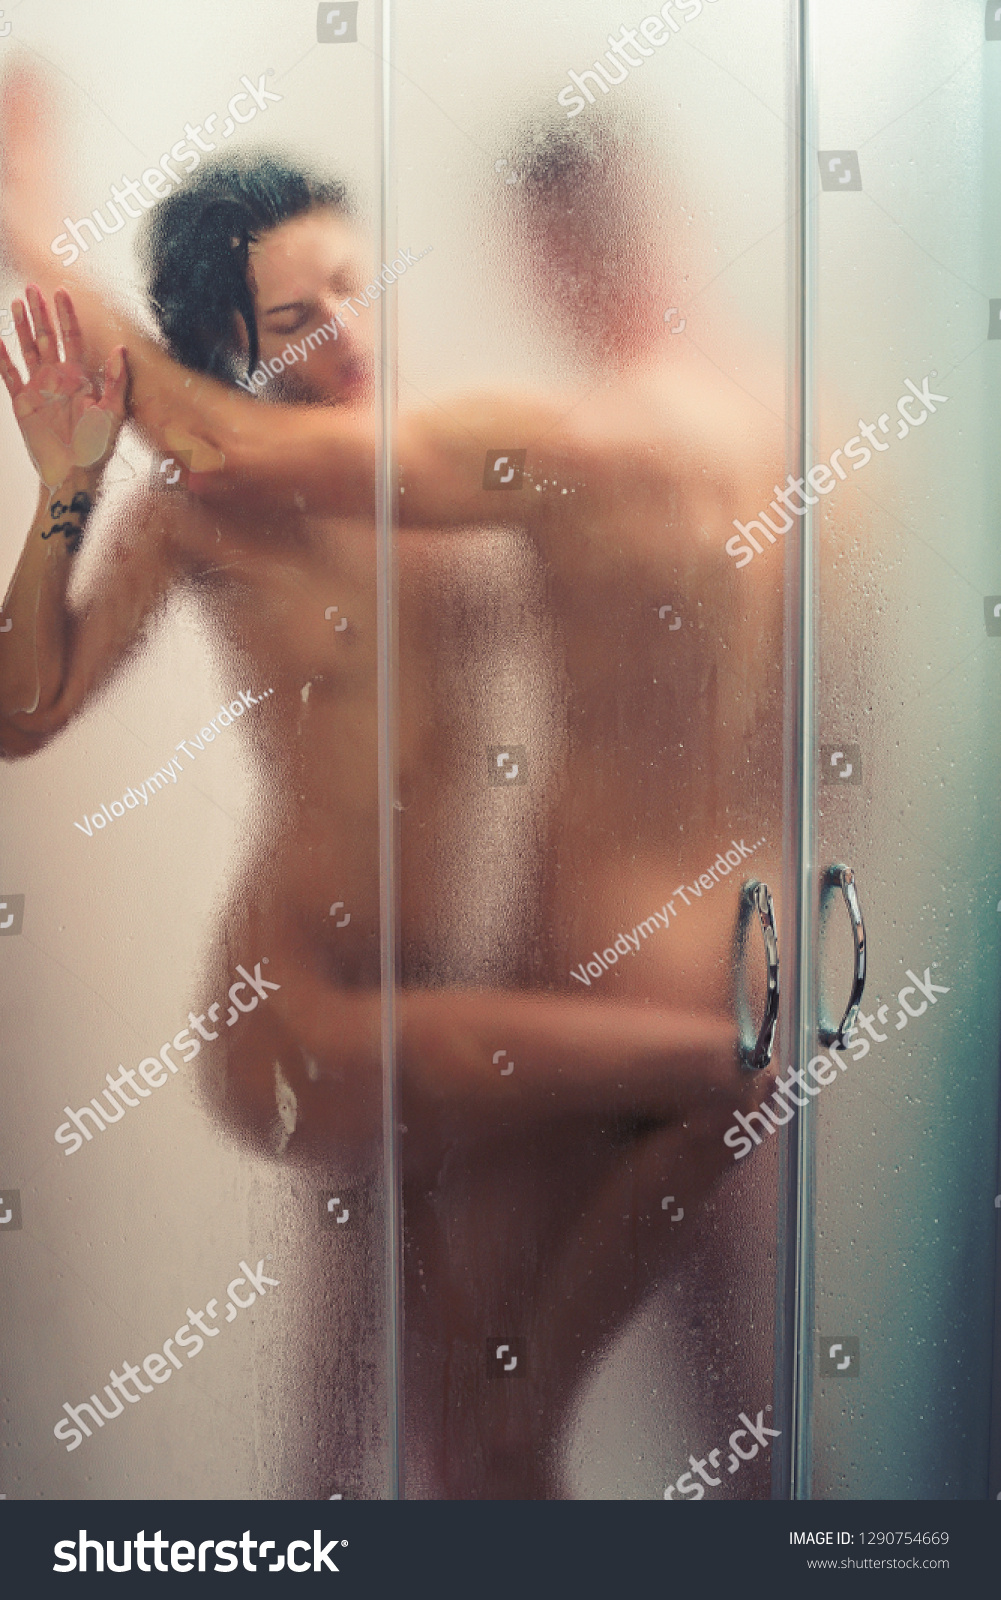 Pictures of naked women taking a shower - Sex photo